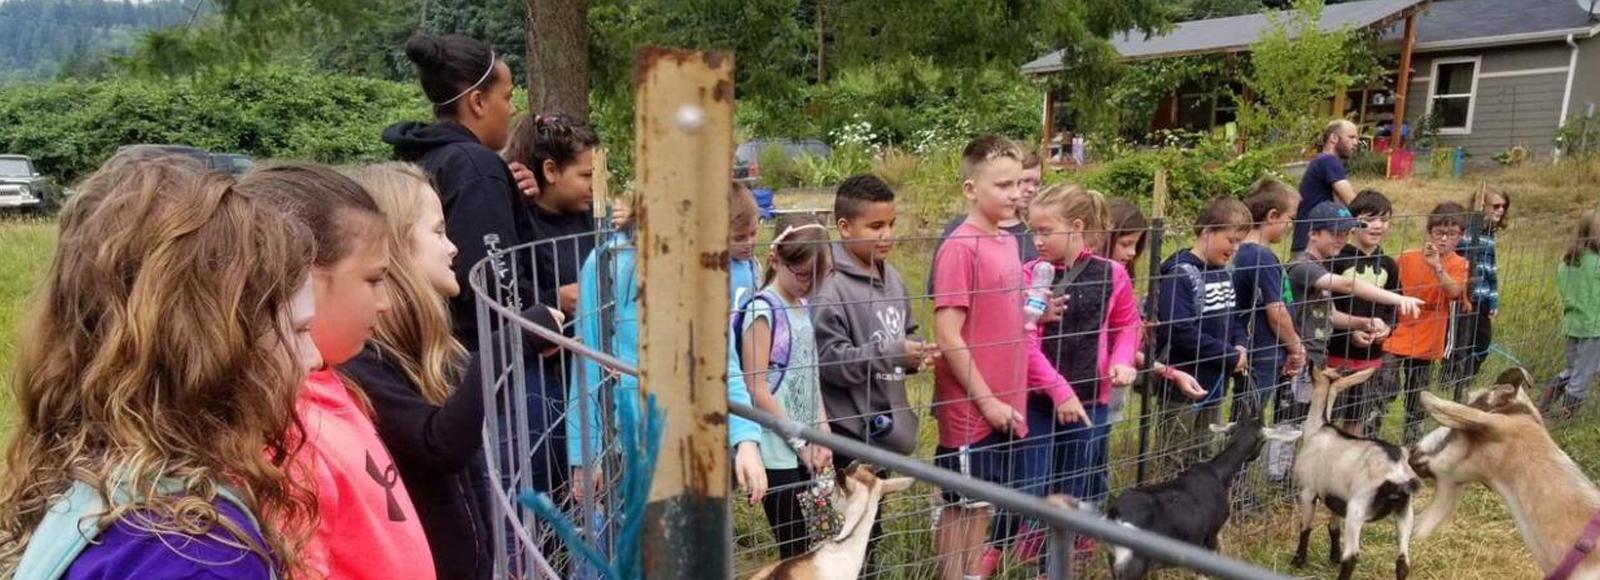 Group of kids stands near a fenced area looking at goats.